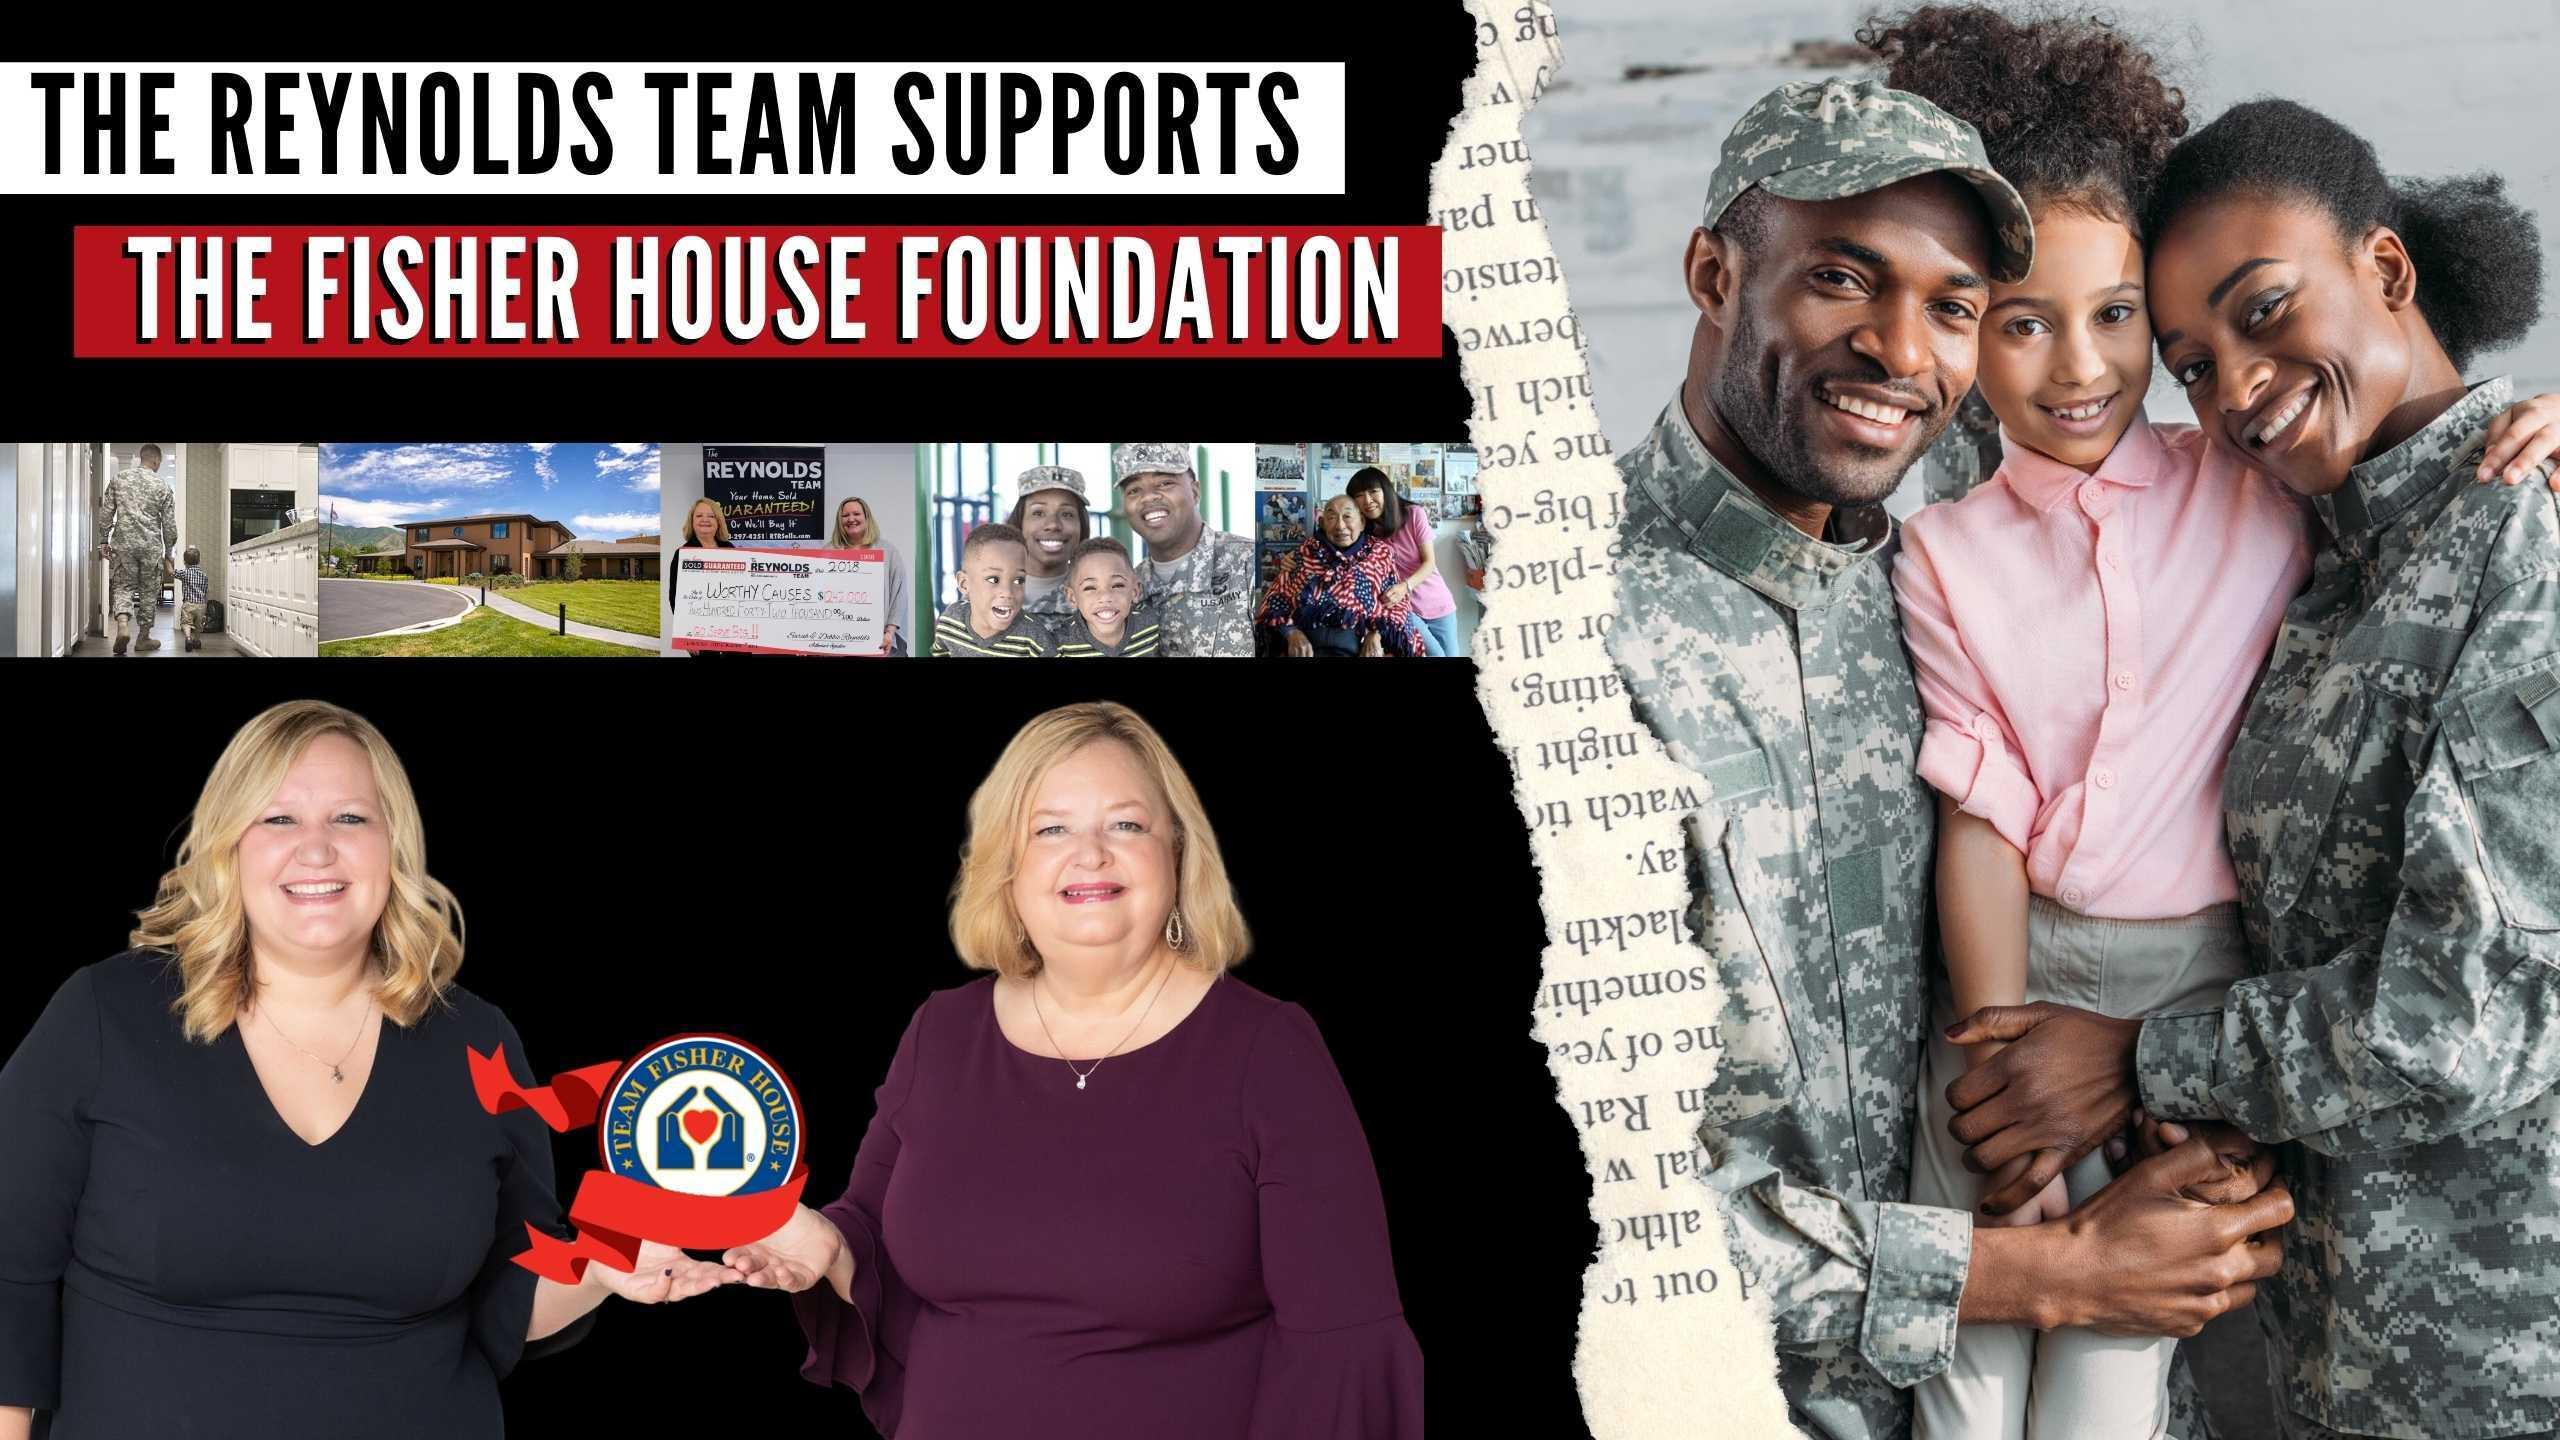 The Reynolds Team Supports The Fisher House Foundation